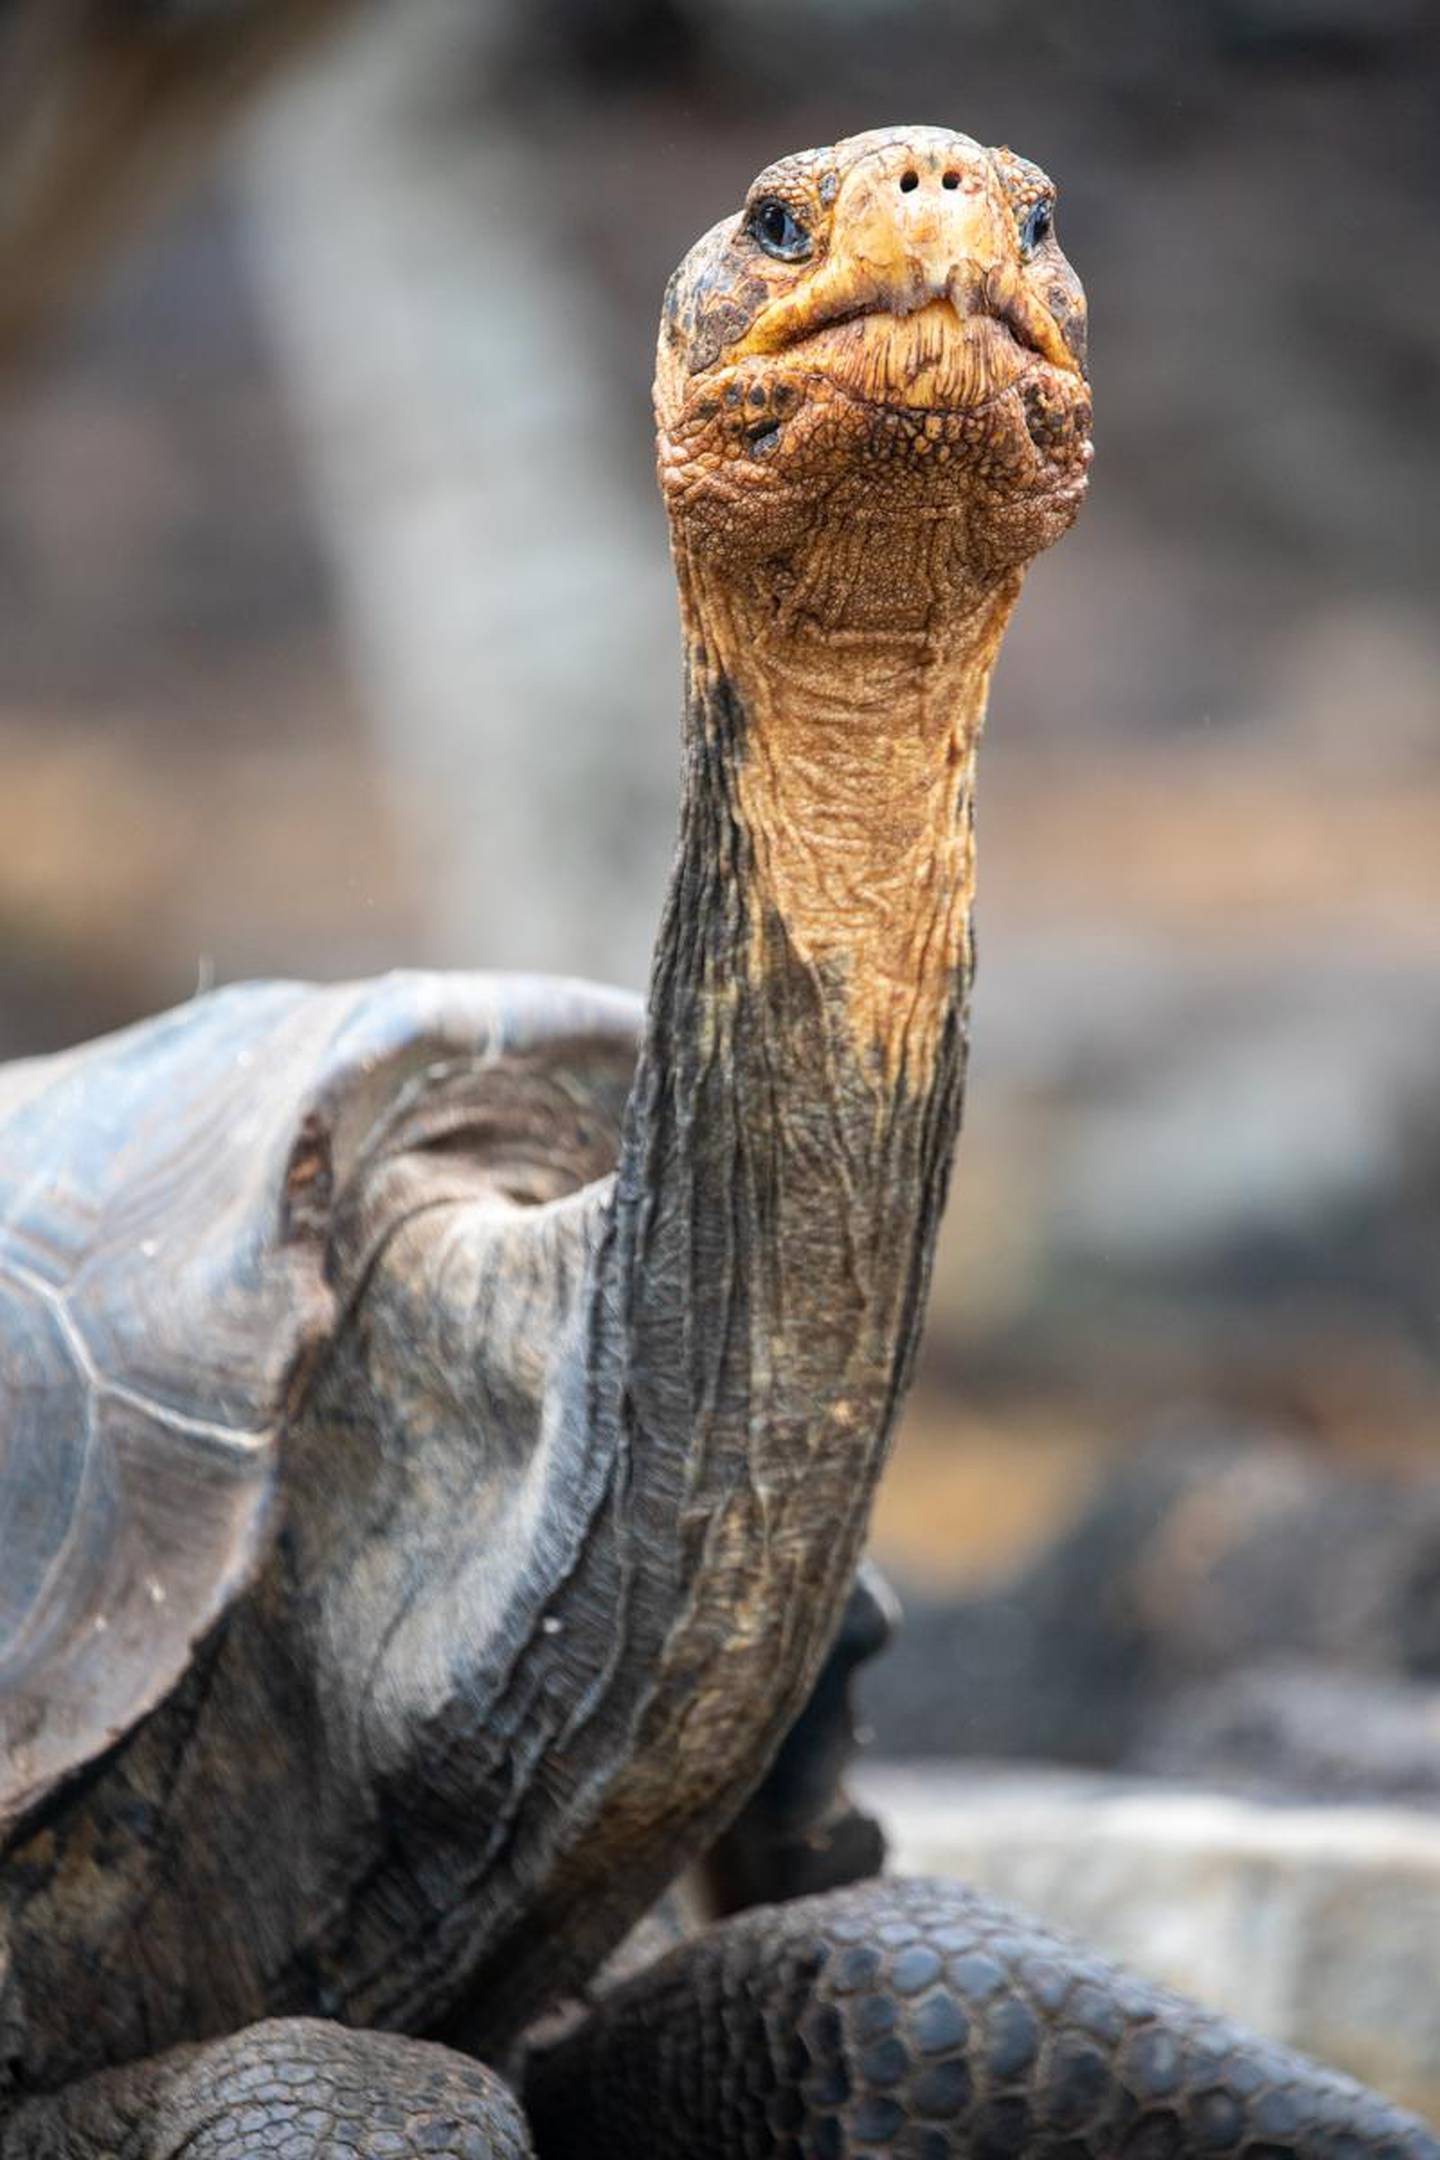 Giant tortoises are synonymous with the Galapagos Islands. Courtesy Jamie Lafferty